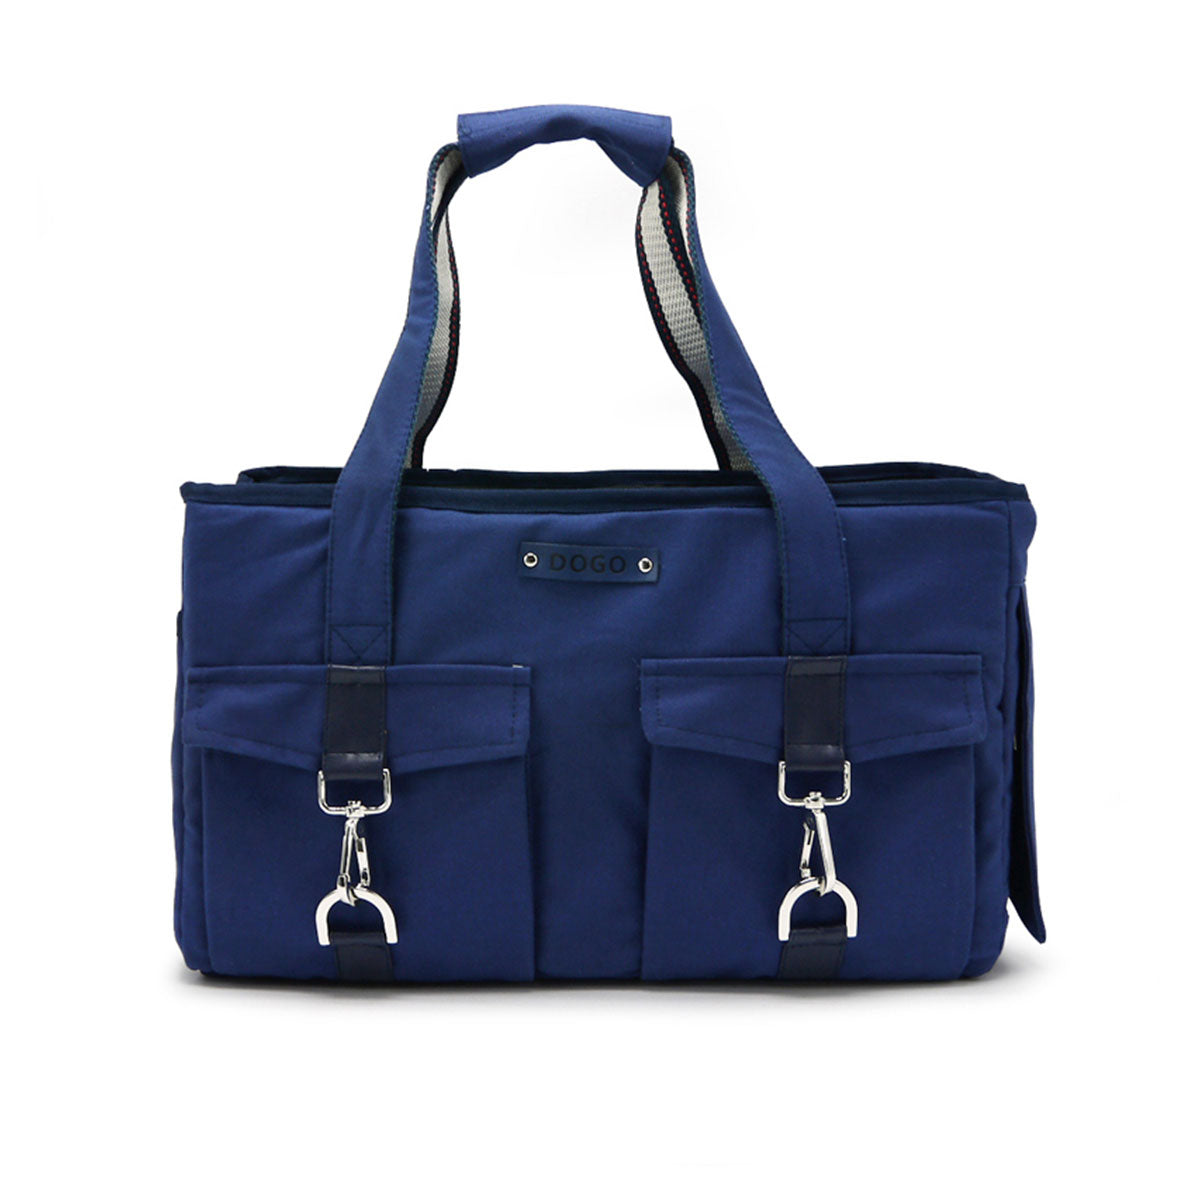 Buckle Tote Dog Carrier in Navy | Pawlicious & Company